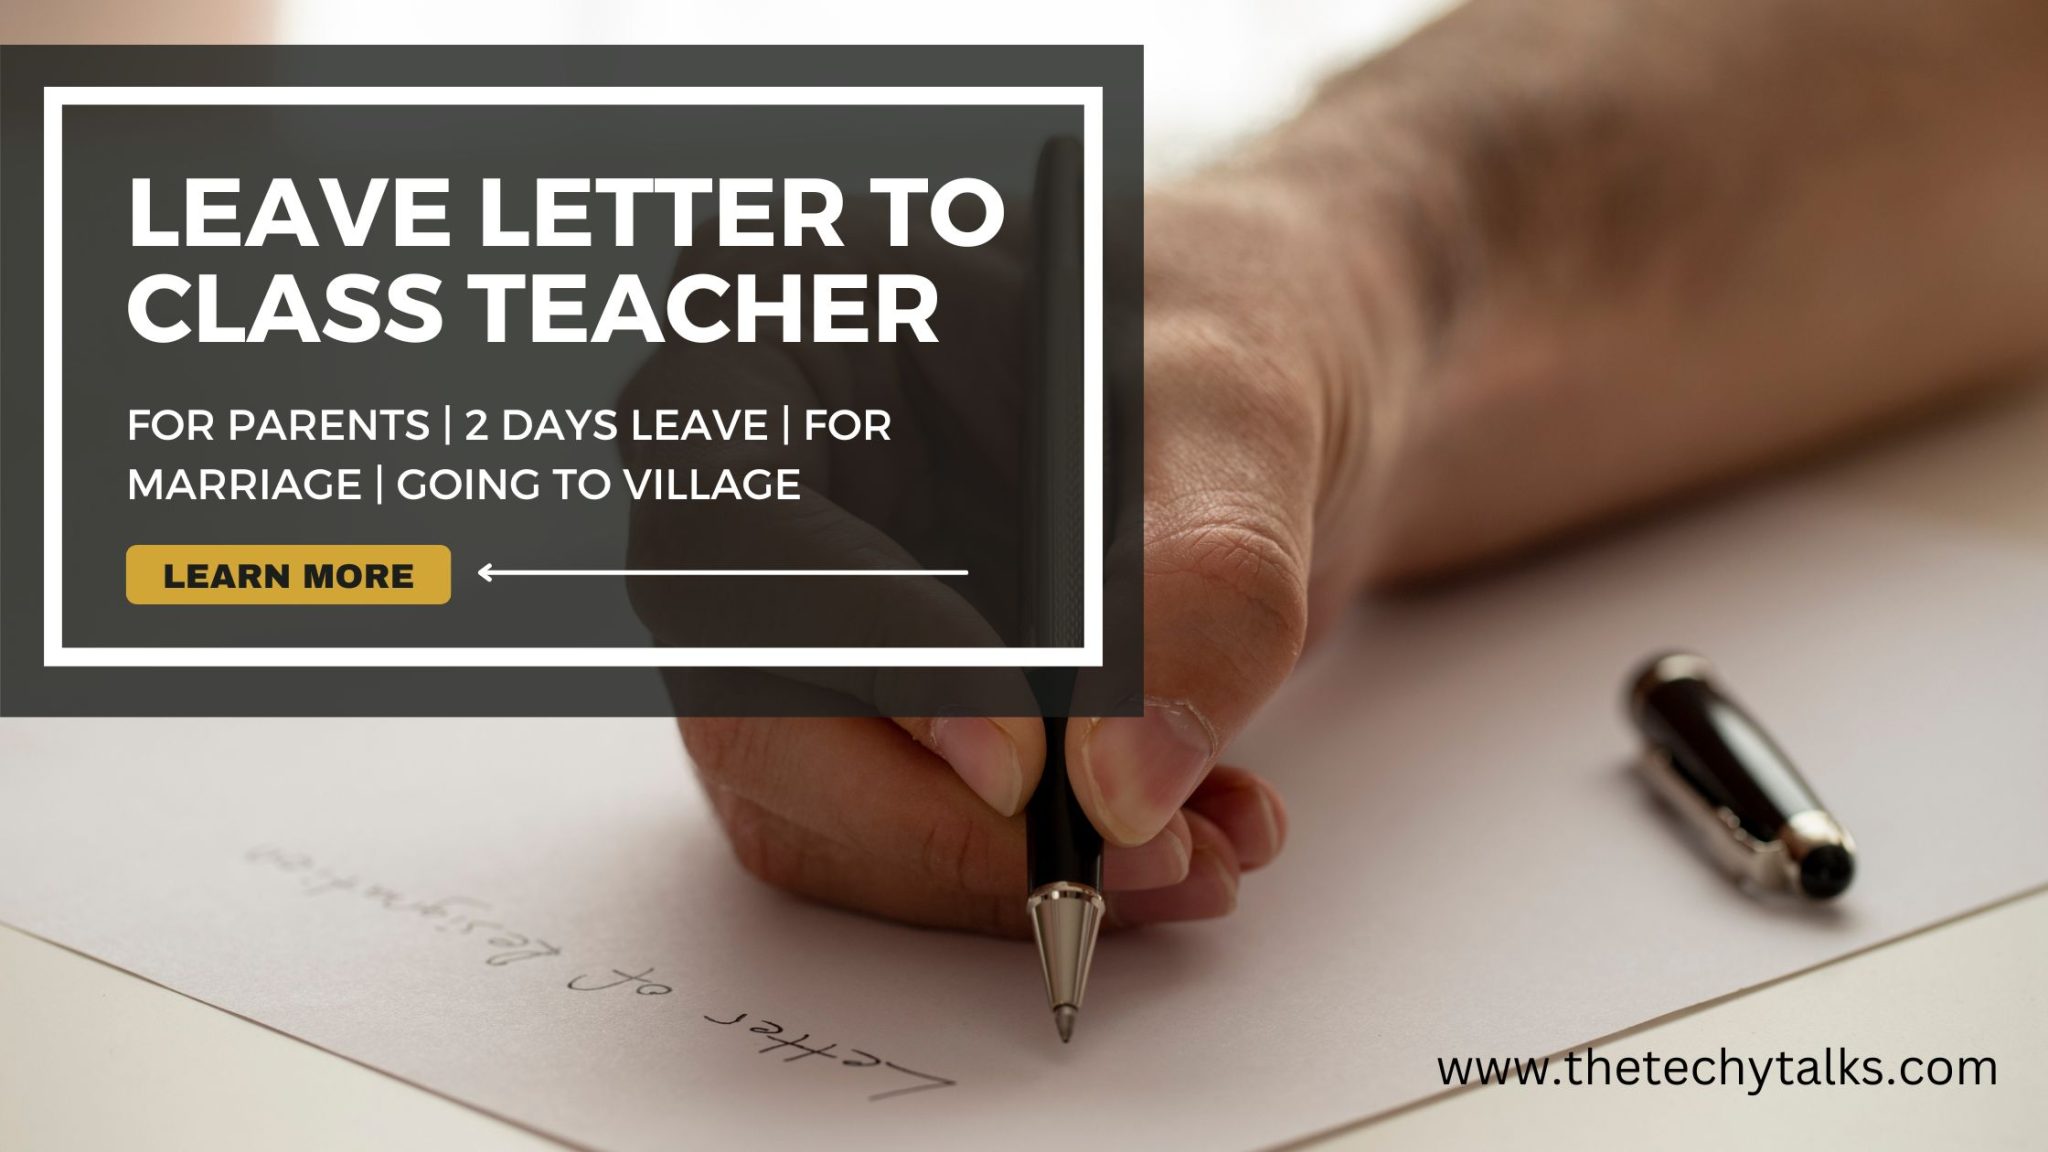 Leave letter to Class Teacher | Parents | 2 Days Leave | for Marriage | Going to Village